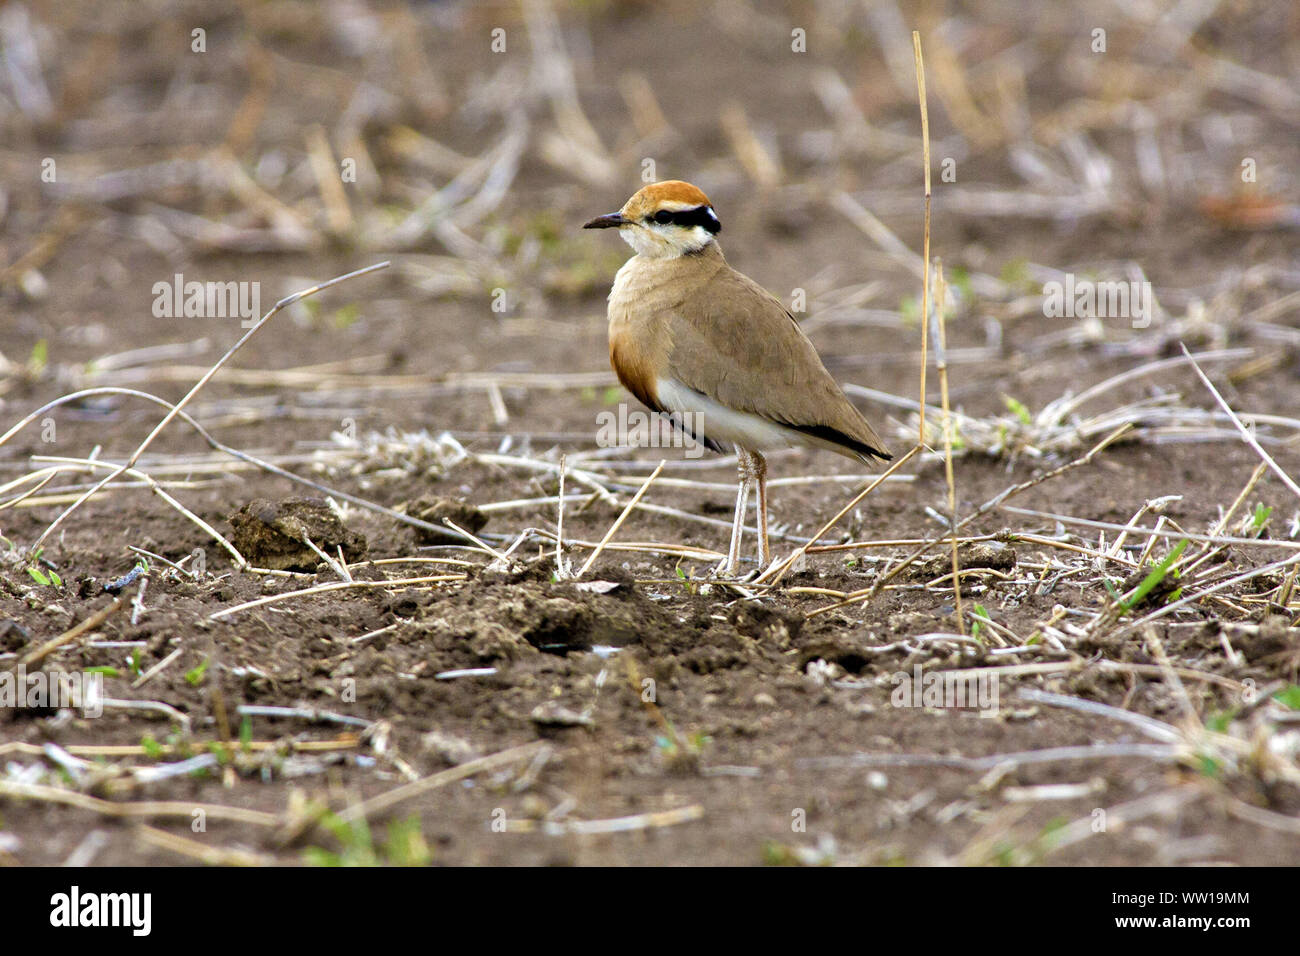 A colorful Orange-crowned Plover in South Africa Stock Photo